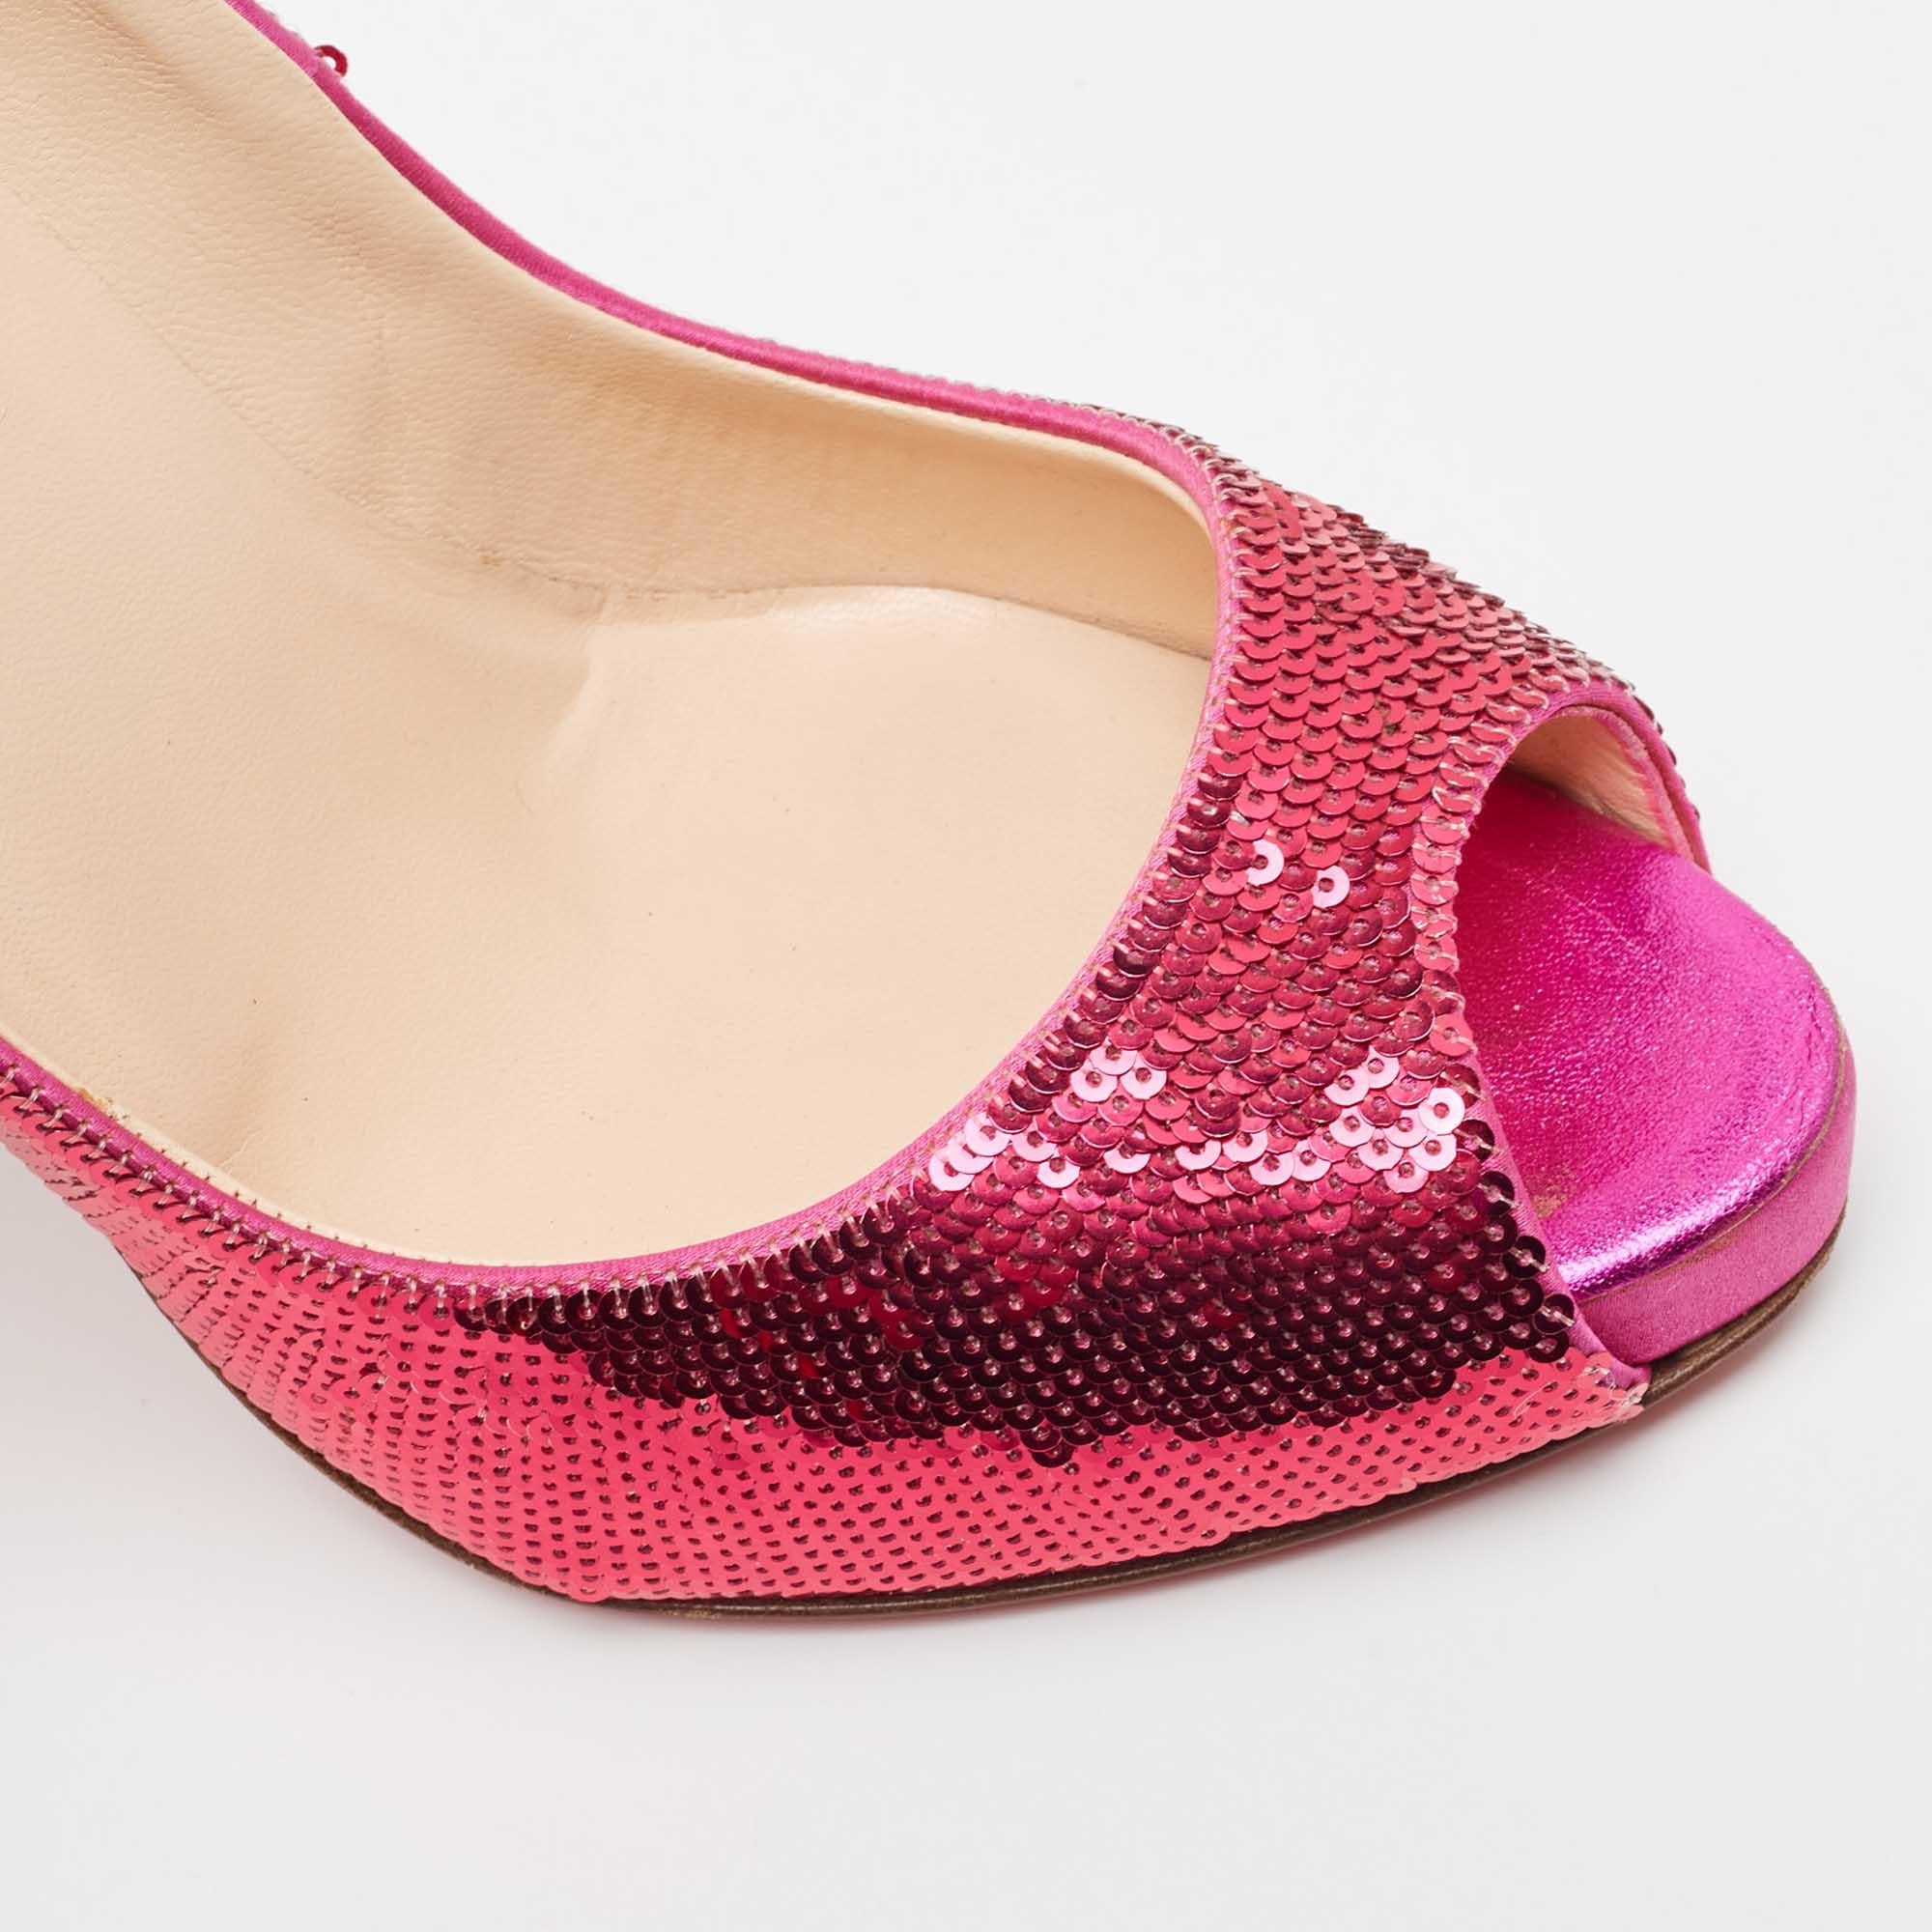 Christian Louboutin Pink Sequin Very Prive Pumps Size 37 For Sale 1